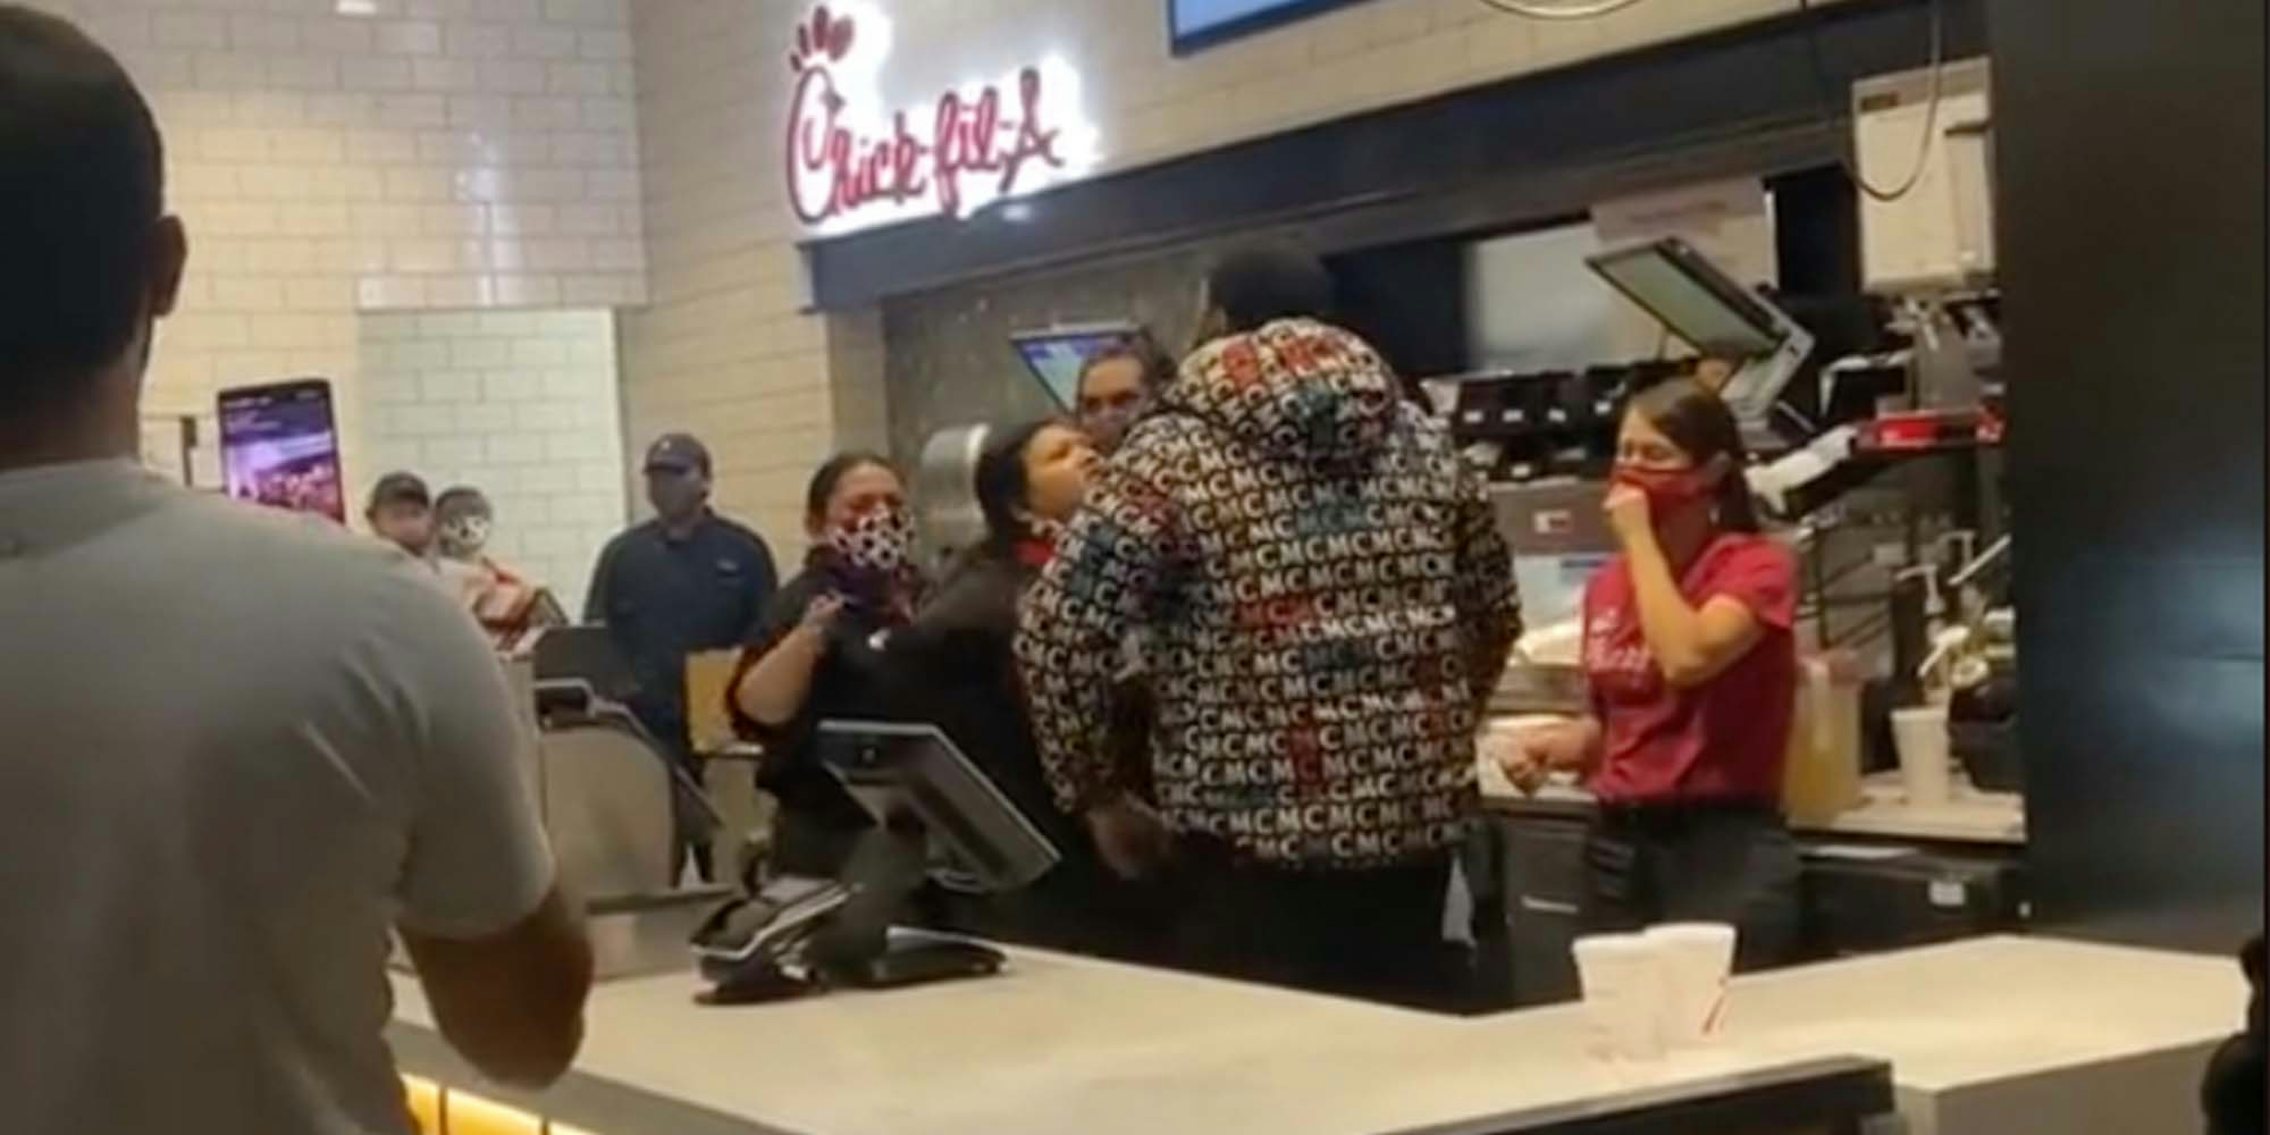 In a TikTok, a man in seen yelling at Chick-Fil-A employees.